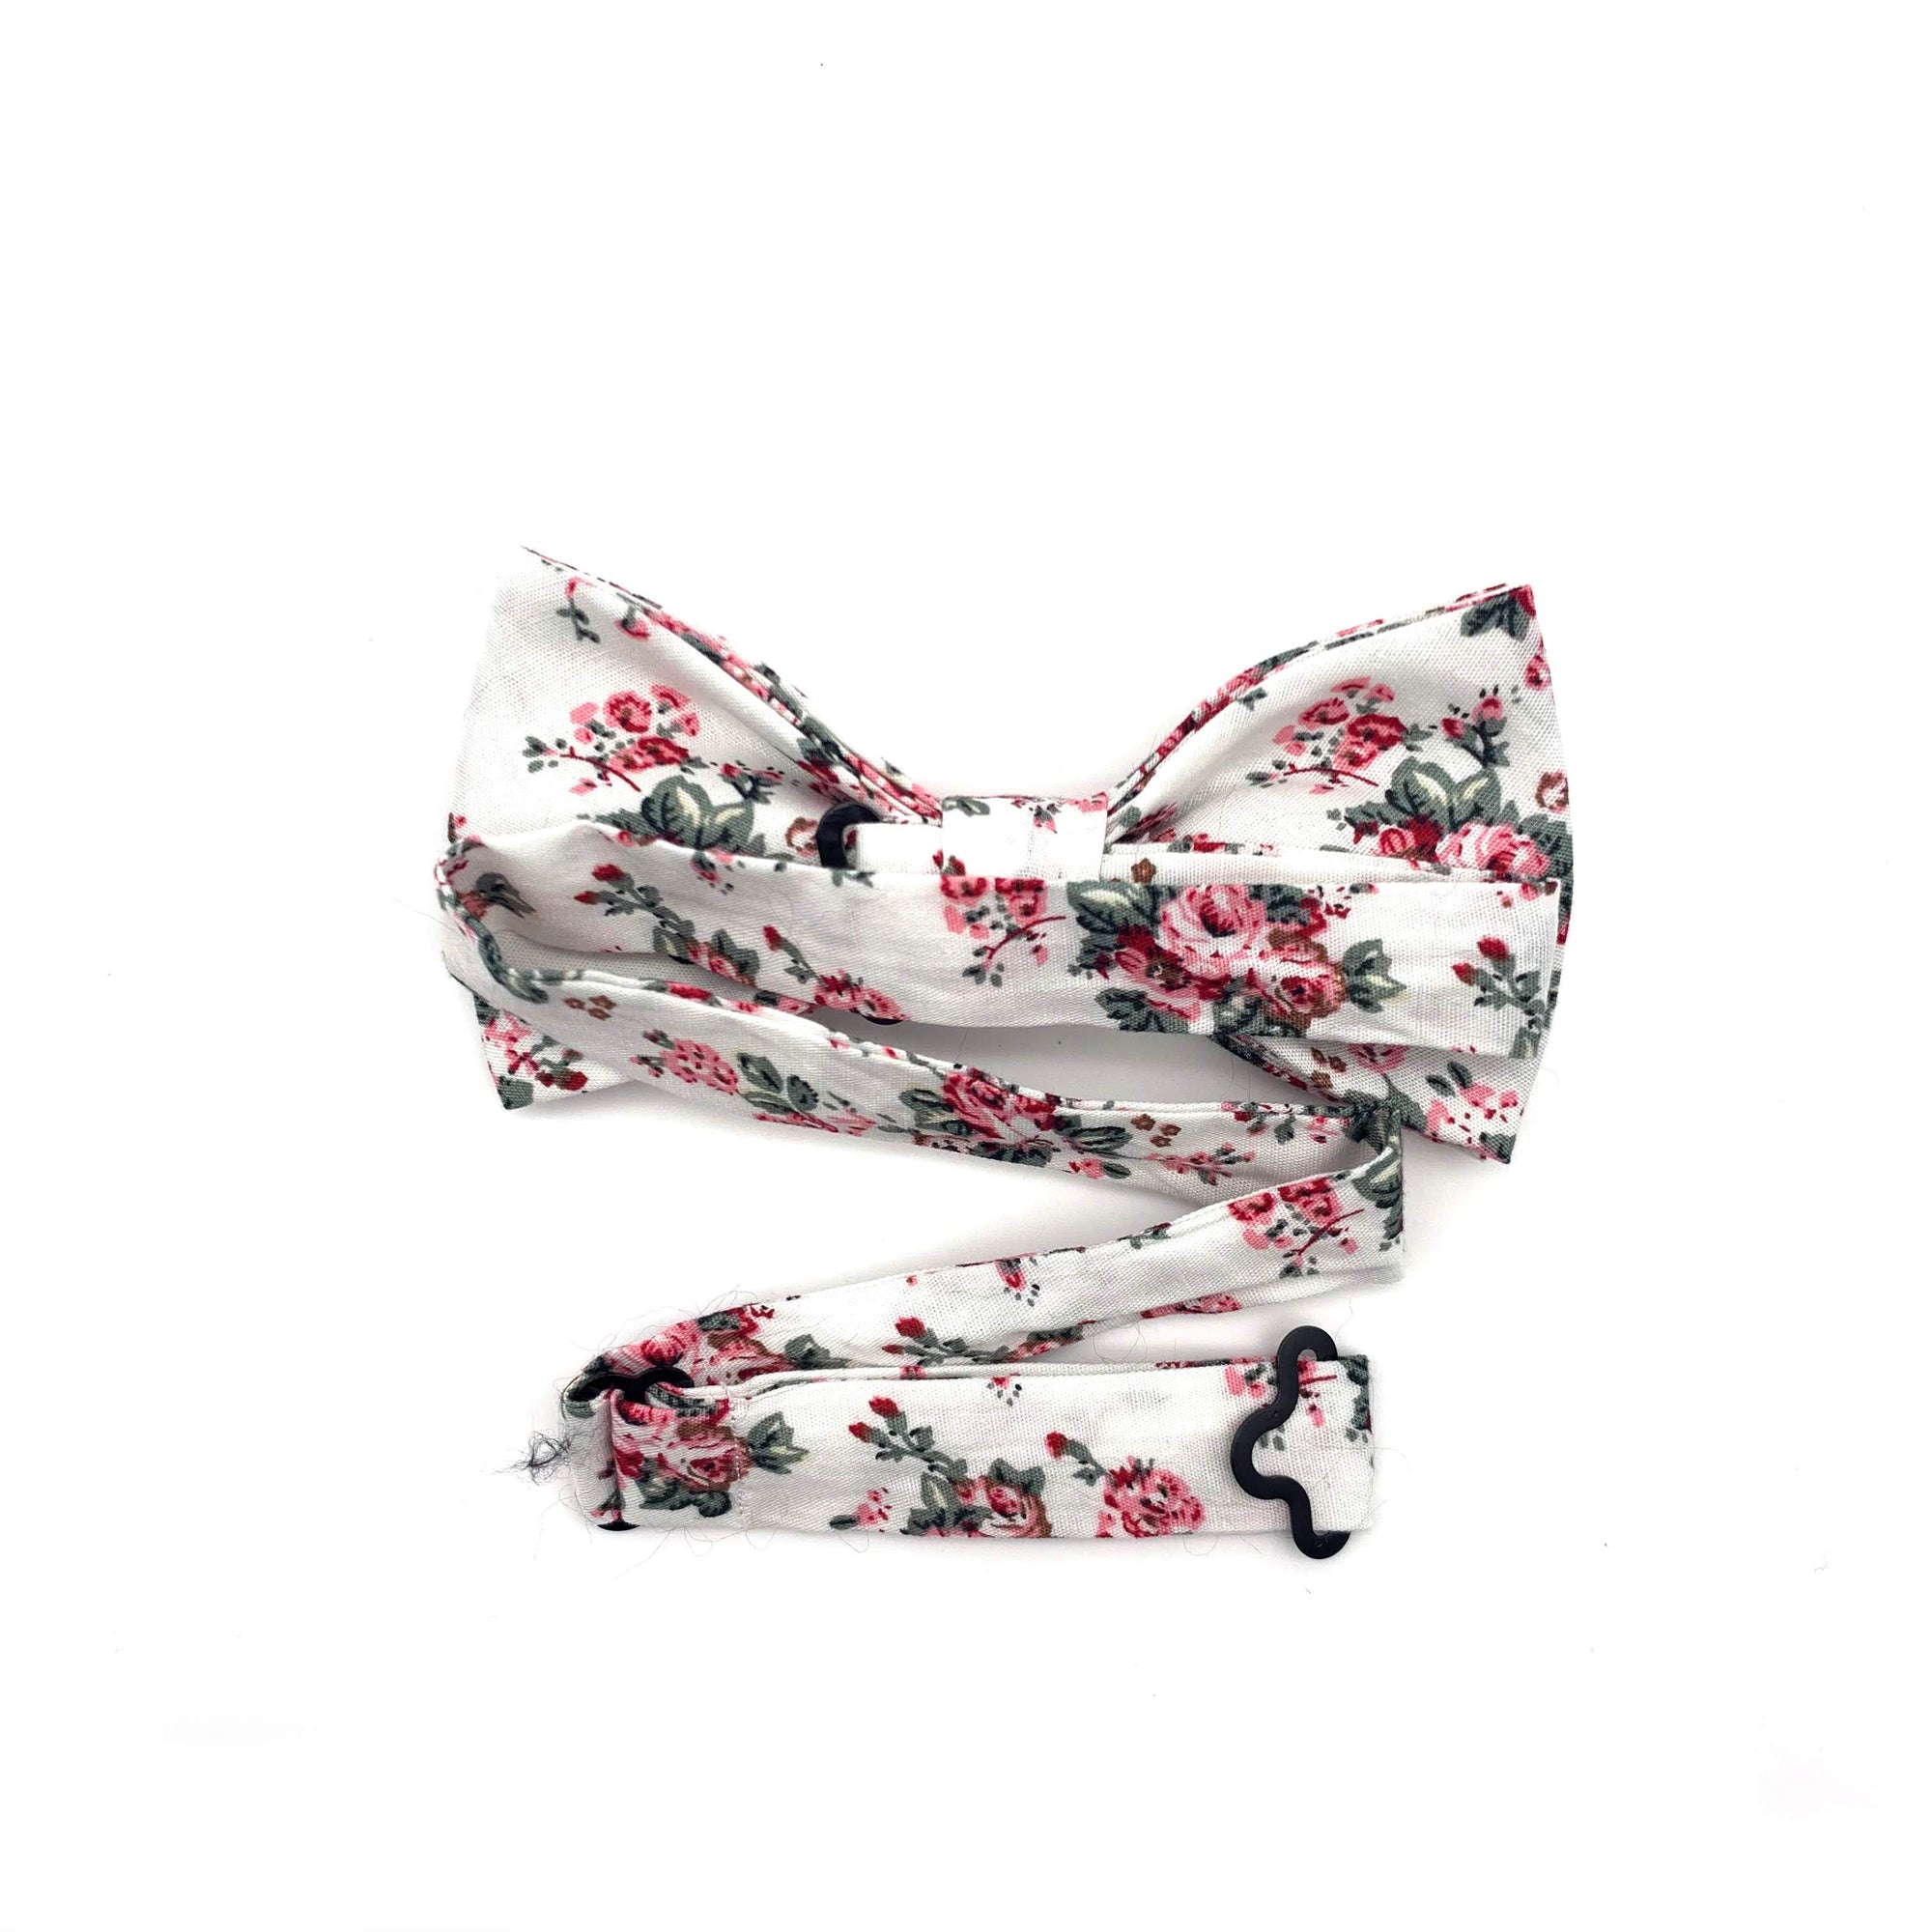 White Floral Bow Tie with Pink Flowers for Men (ABDIEL)-White Floral Bow Tie (Pre-tied) 100% Cotton Flannel Handmade Adjustable to fit most neck sizes 13 3/4" - 18" Color: White Great for Prom Dinners Interviews Photo shoots Photo sessions Dates Groom to stand out between his Groomsmen pair them up with neckties while he wears the Floral bow tie. Floral bow tie for weddings and events. Great anniversary present and gift. Also great gift for the groom and his groomsmen to wear at the wedding, and